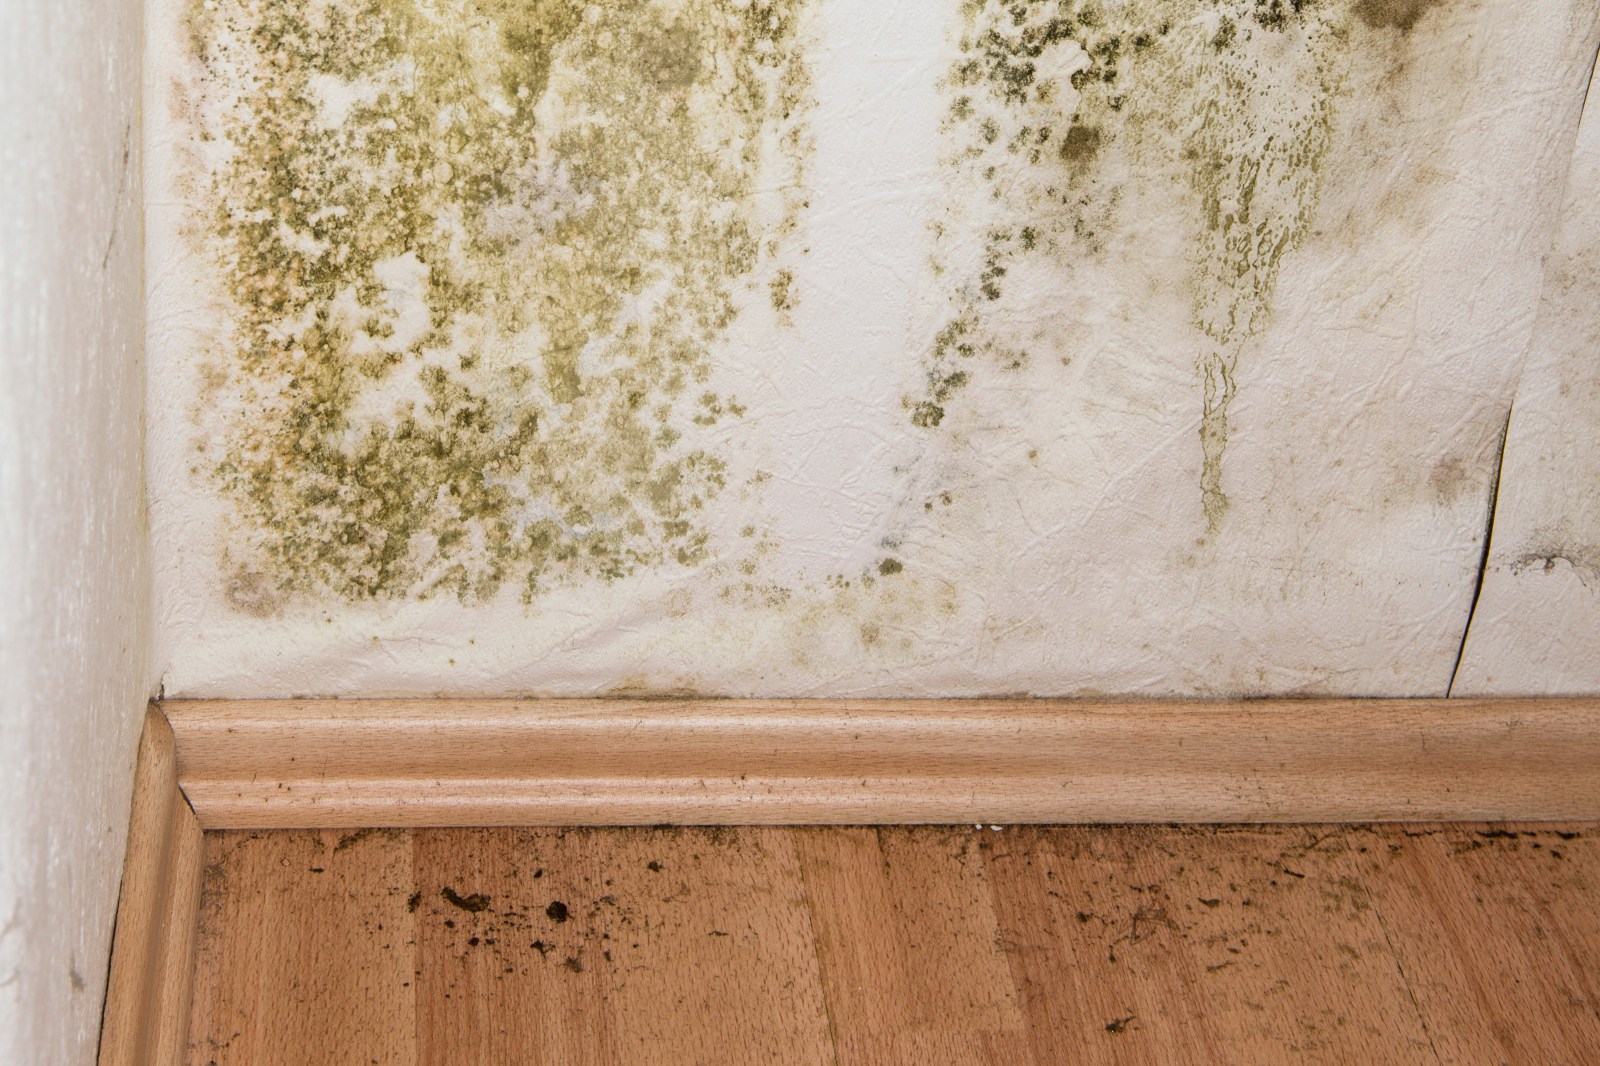 How To Clean Mold In House? 